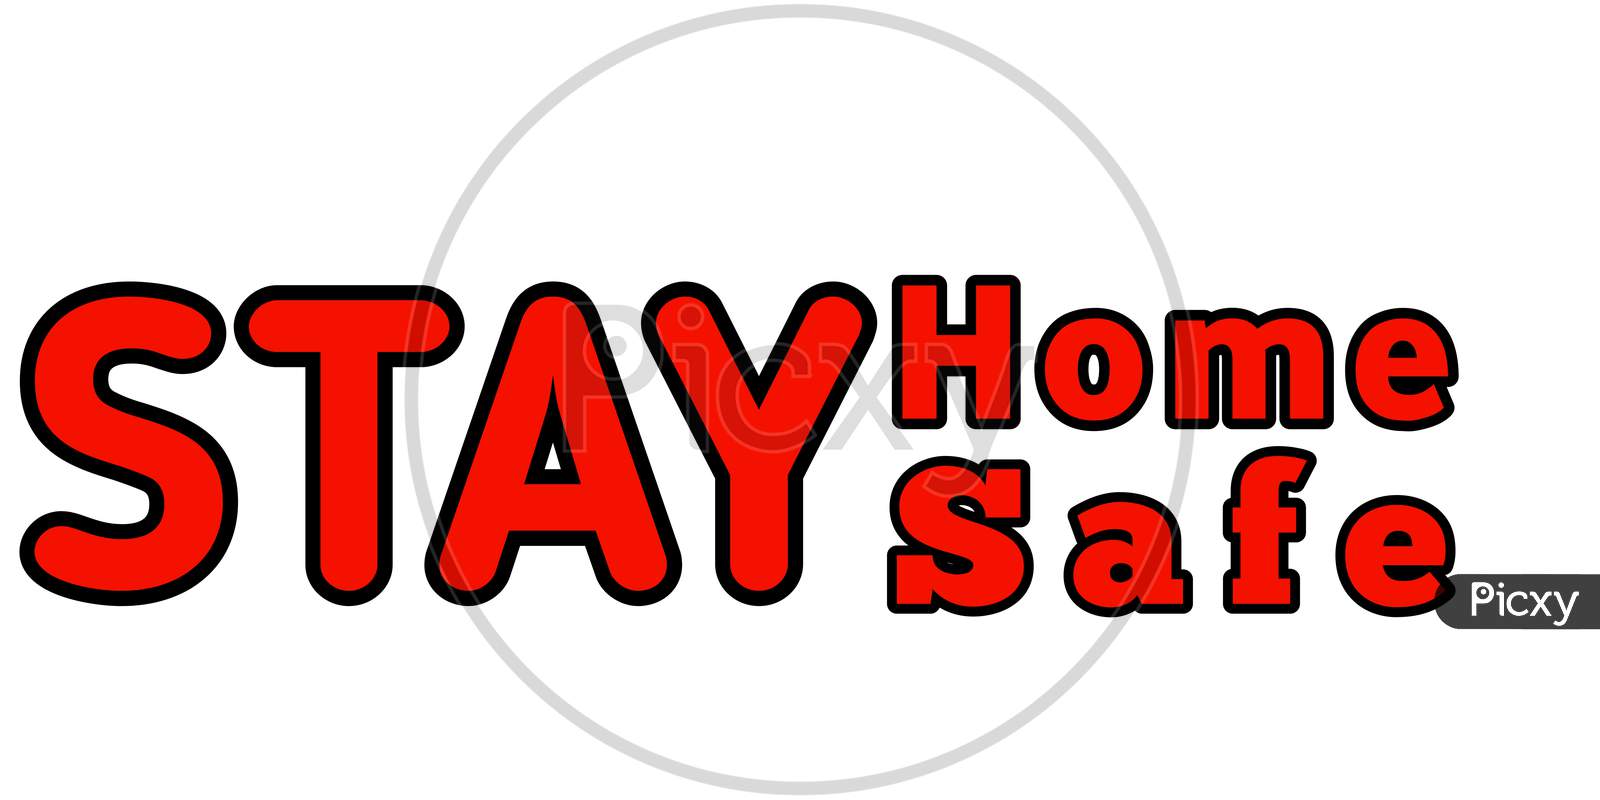 Stay home stay safe red color slogan illustration. Stay home stay safe clip art.